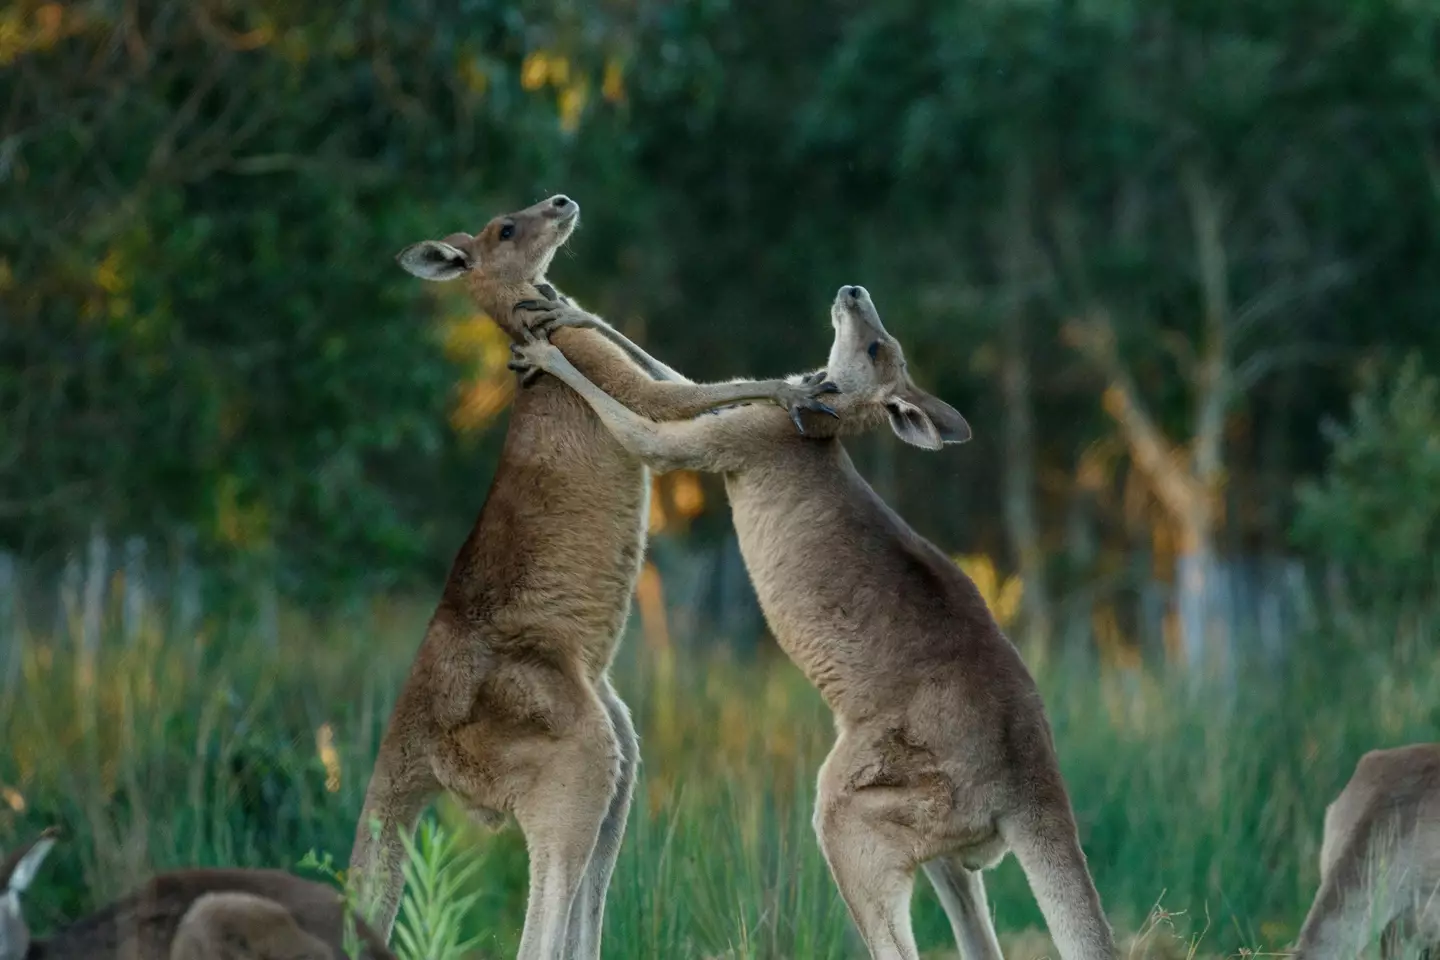 According to wildlife carer, Michelle Jones, it's currently breeding season which can make kangaroos more aggressive.